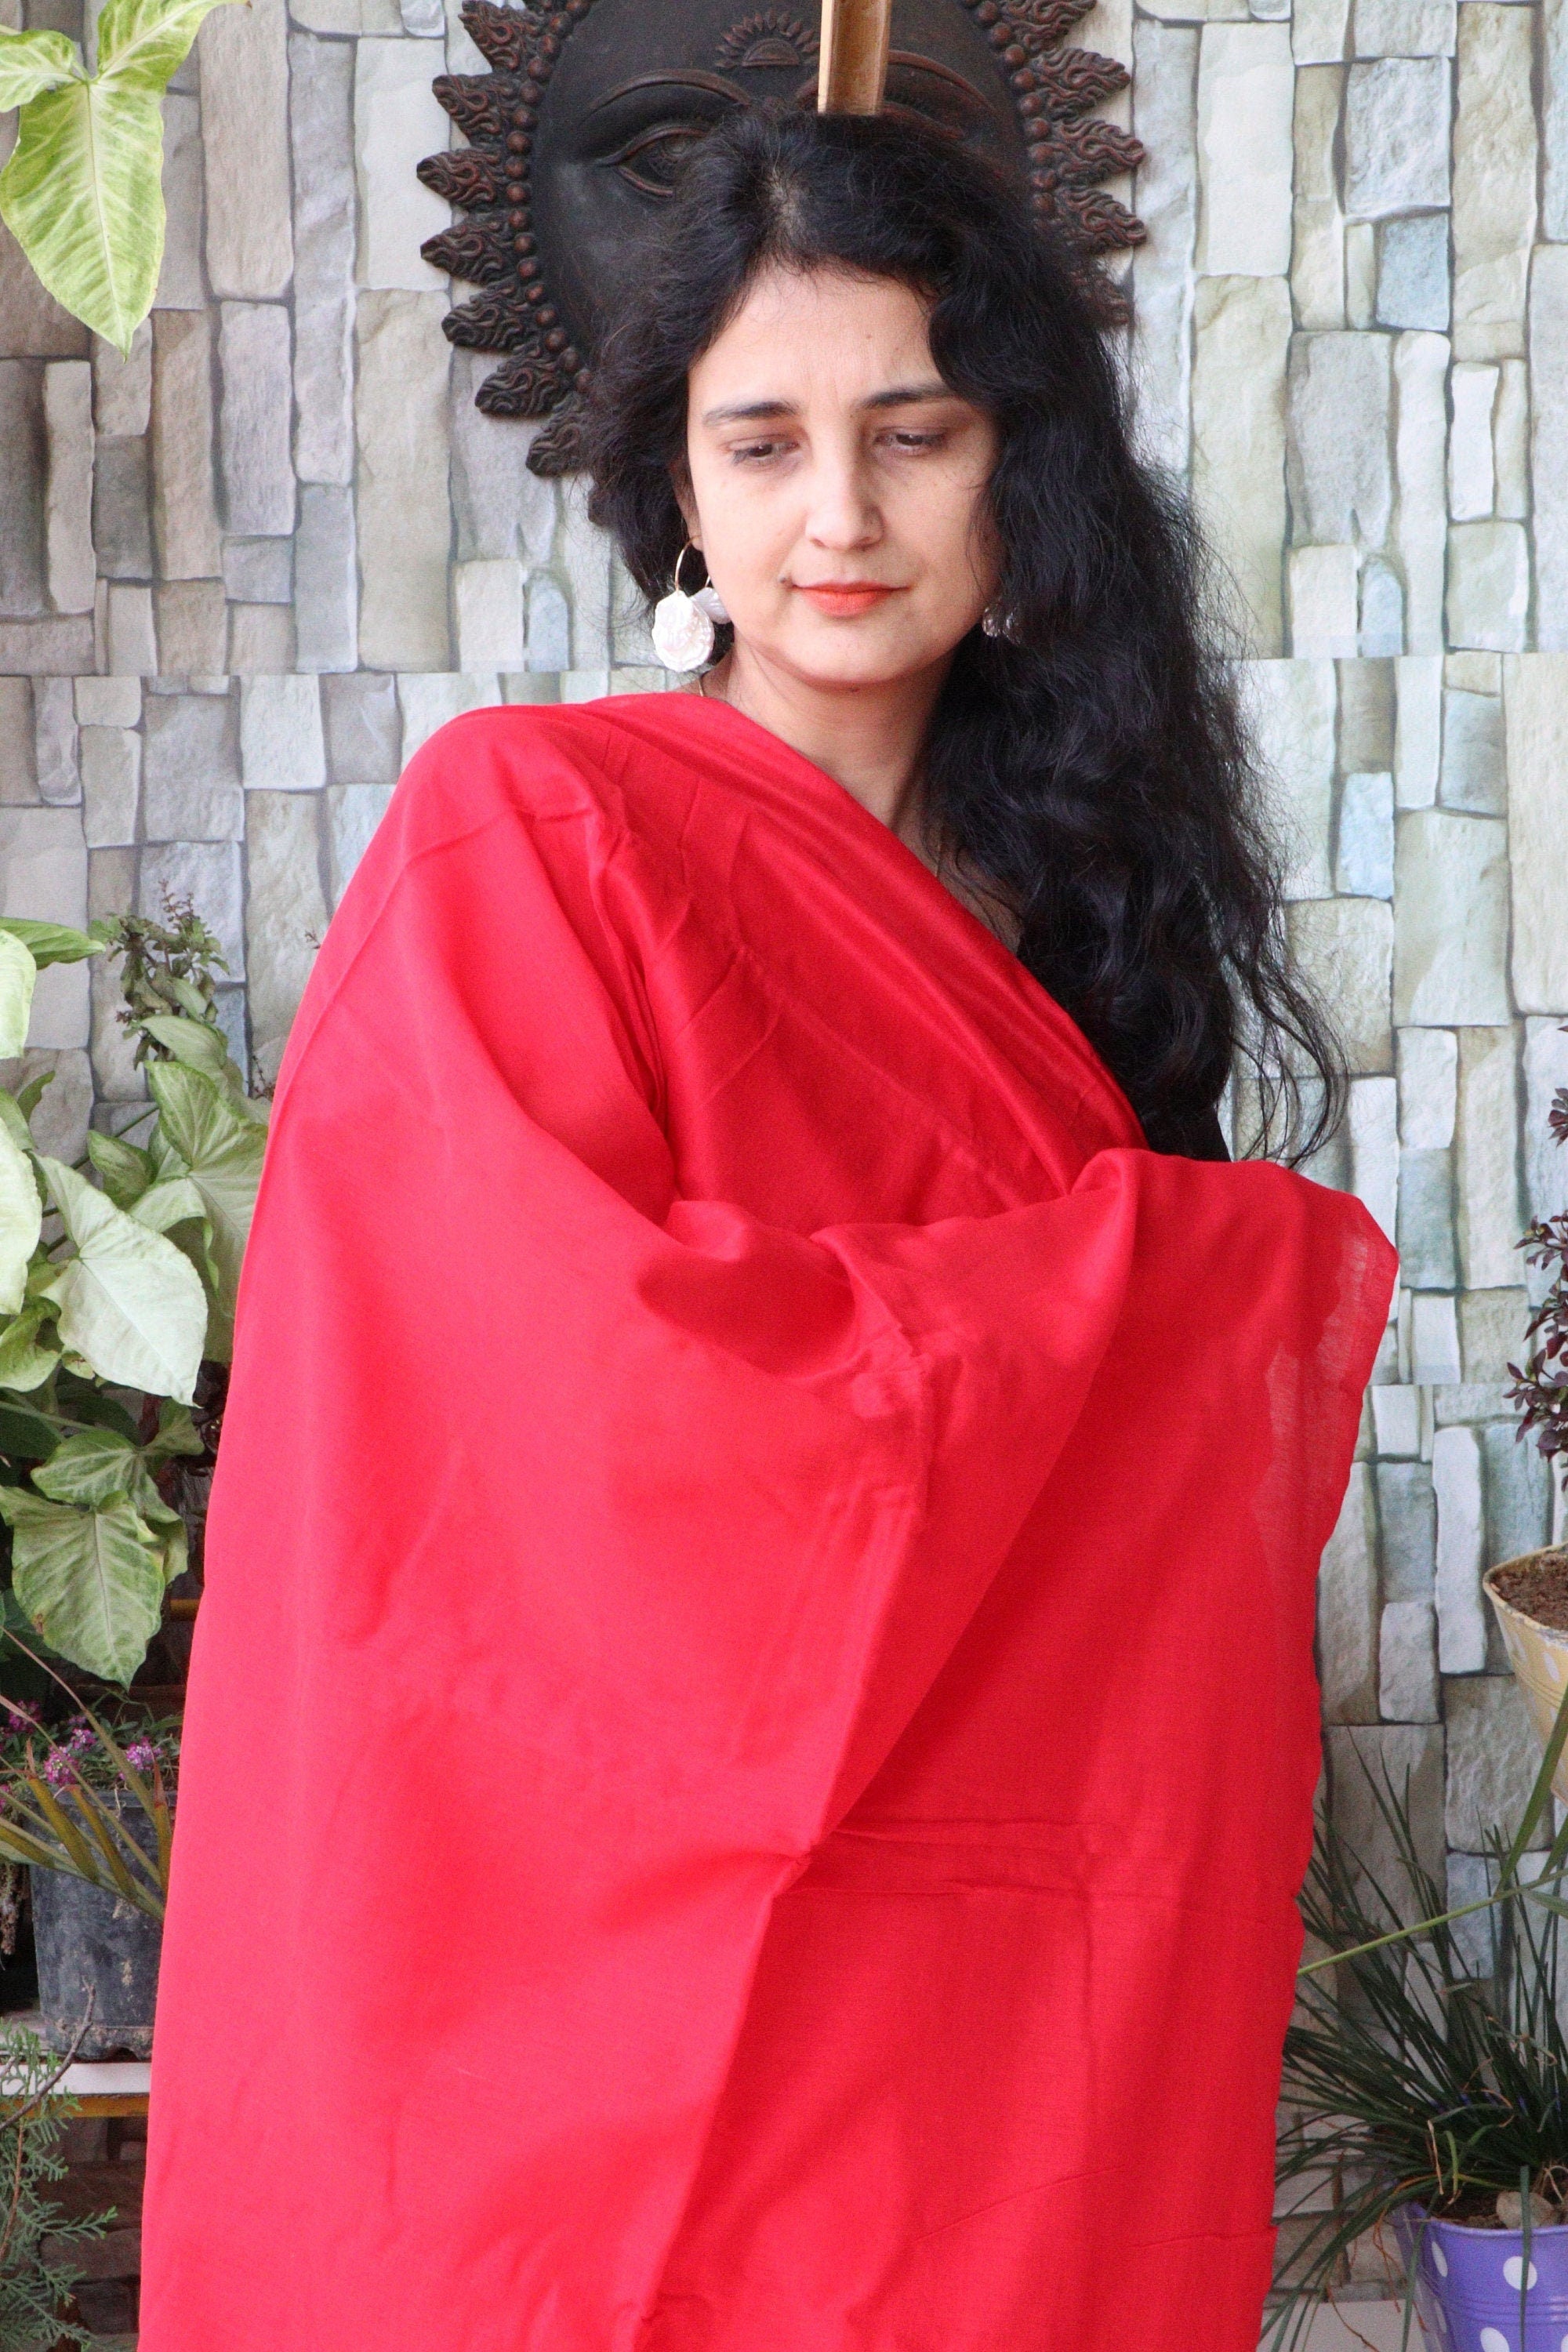 Handwoven Saree - Solid Colored Cotton Muslin/Mulmul Saree - Ruby Woo